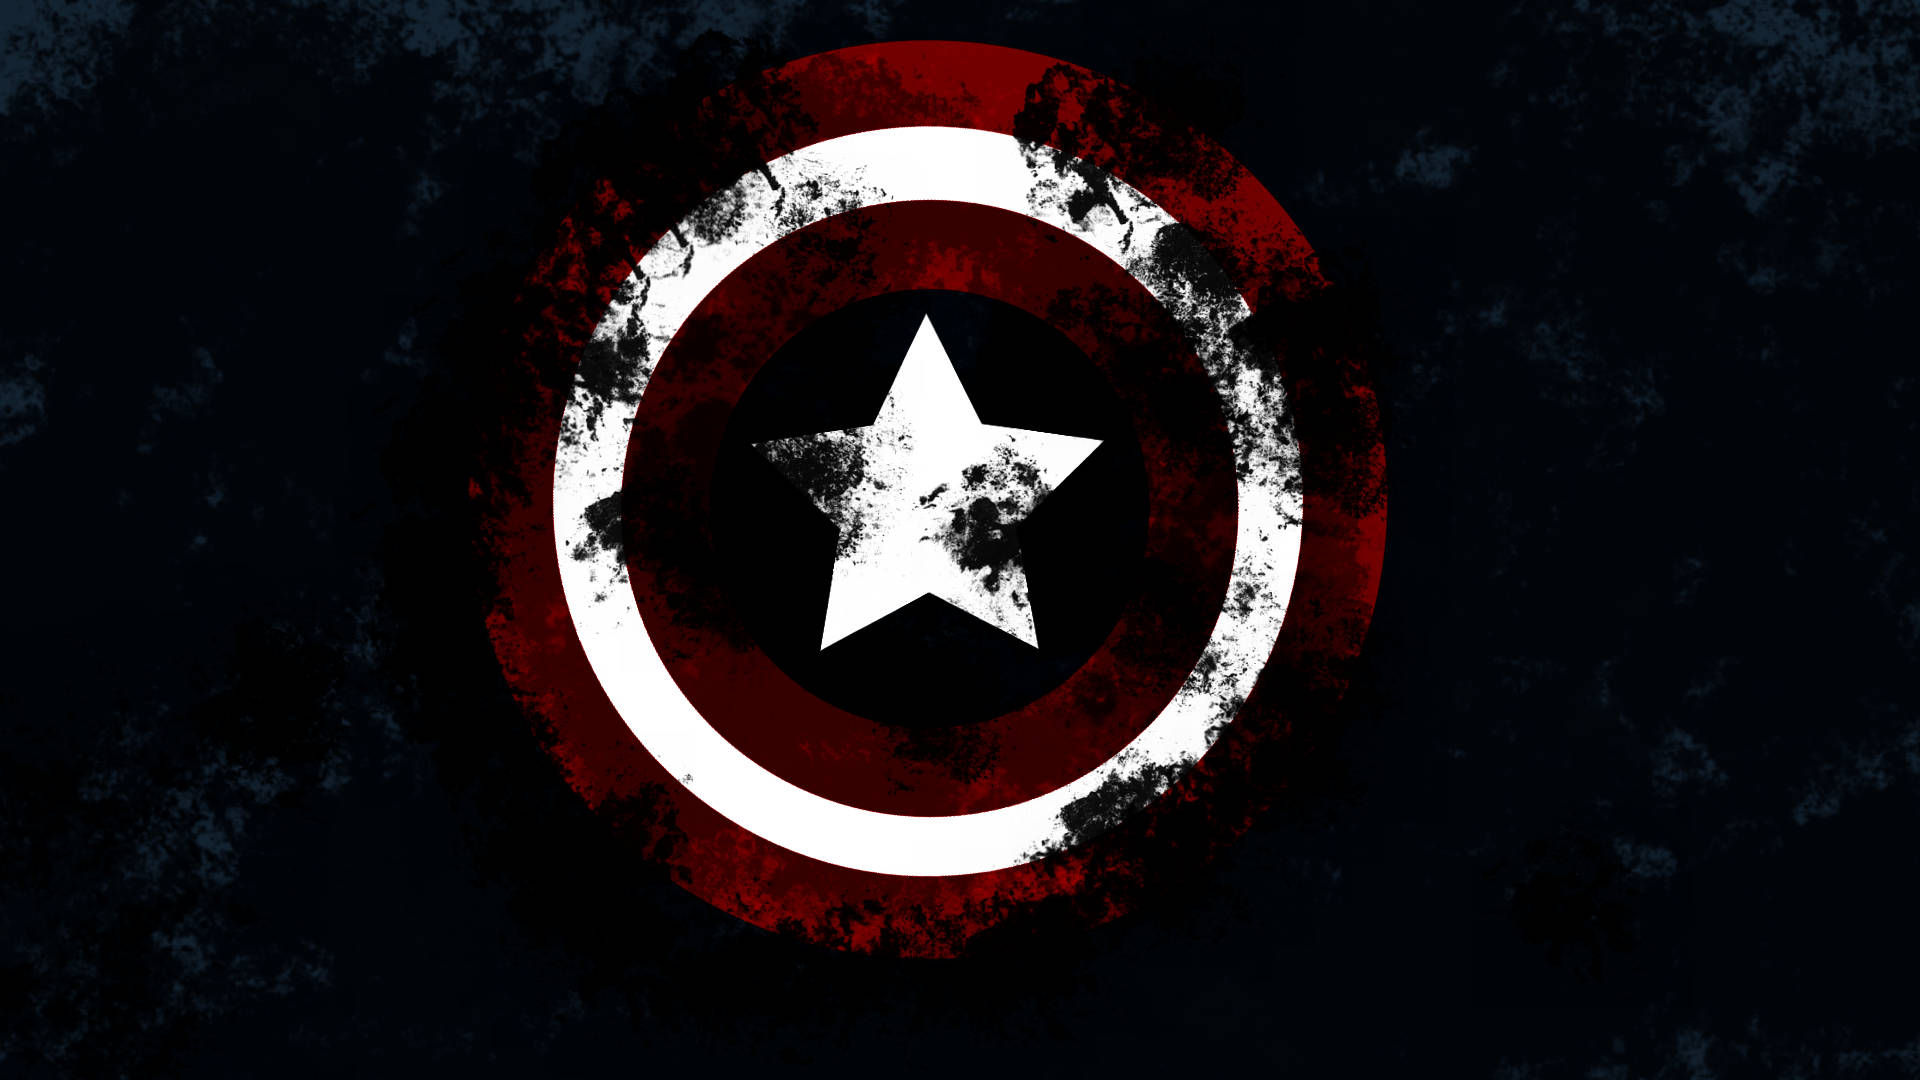 Captain America Shield Black Stains Background